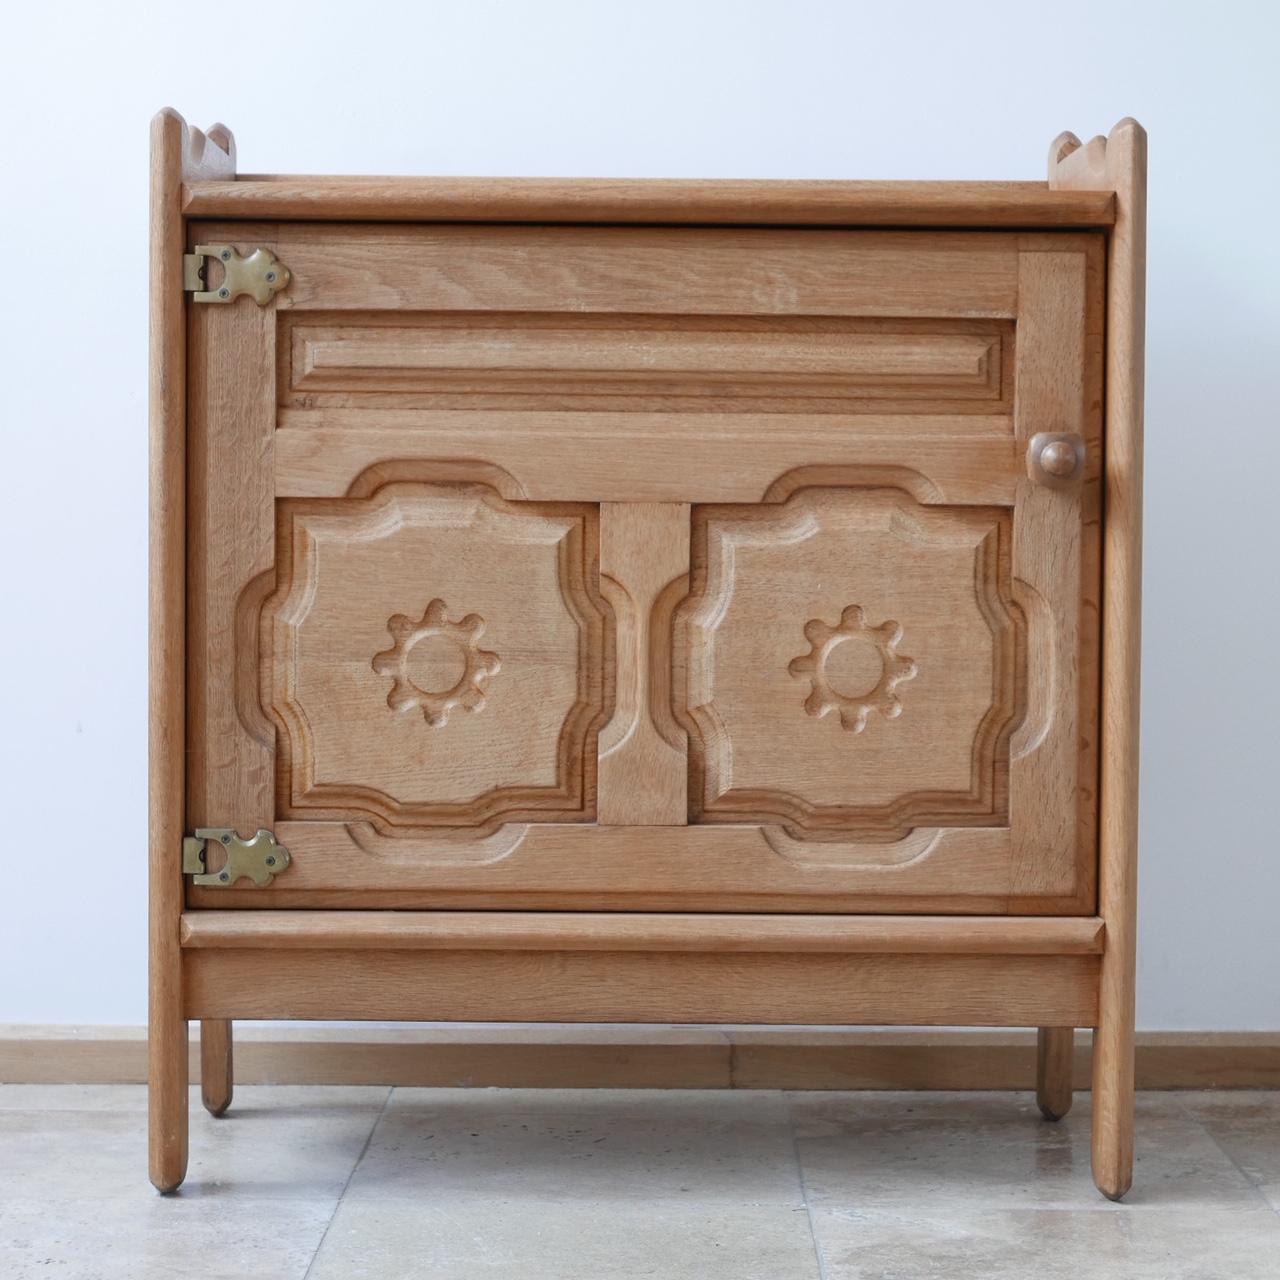 A Guillerme et Chambron midcentury oak cabinet
One of two similar cabinets available
This listing is for the smaller one in the duo photo.
By French design legends Guillerme et Chambron.
Formed from oak.
Chunky good quality brass